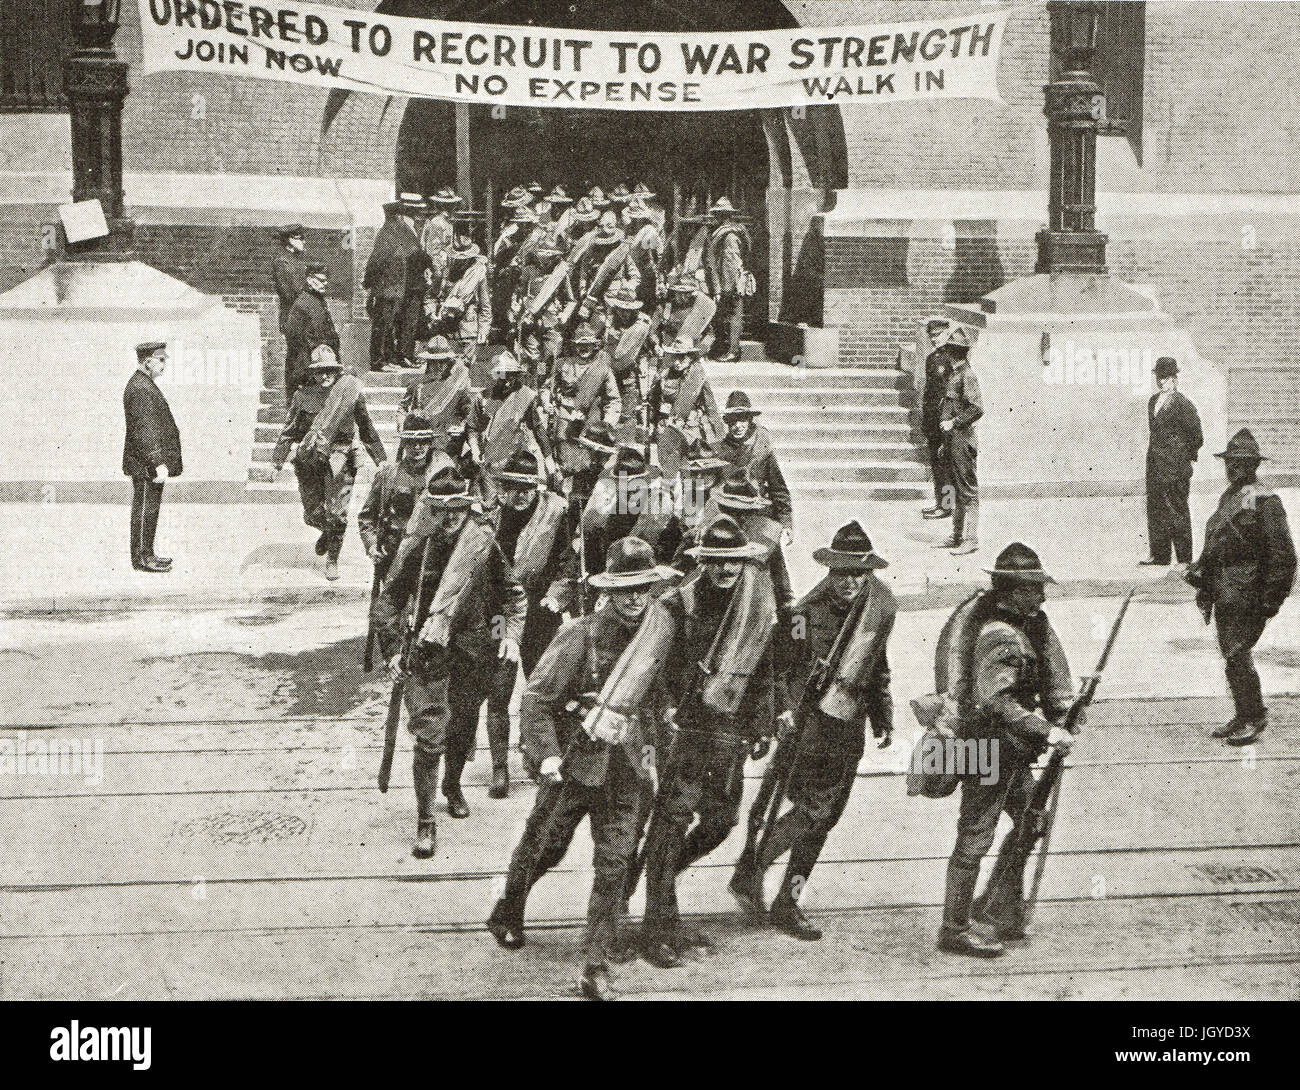 Early American Army recruits, New York recruiting office, 1917 Stock Photo